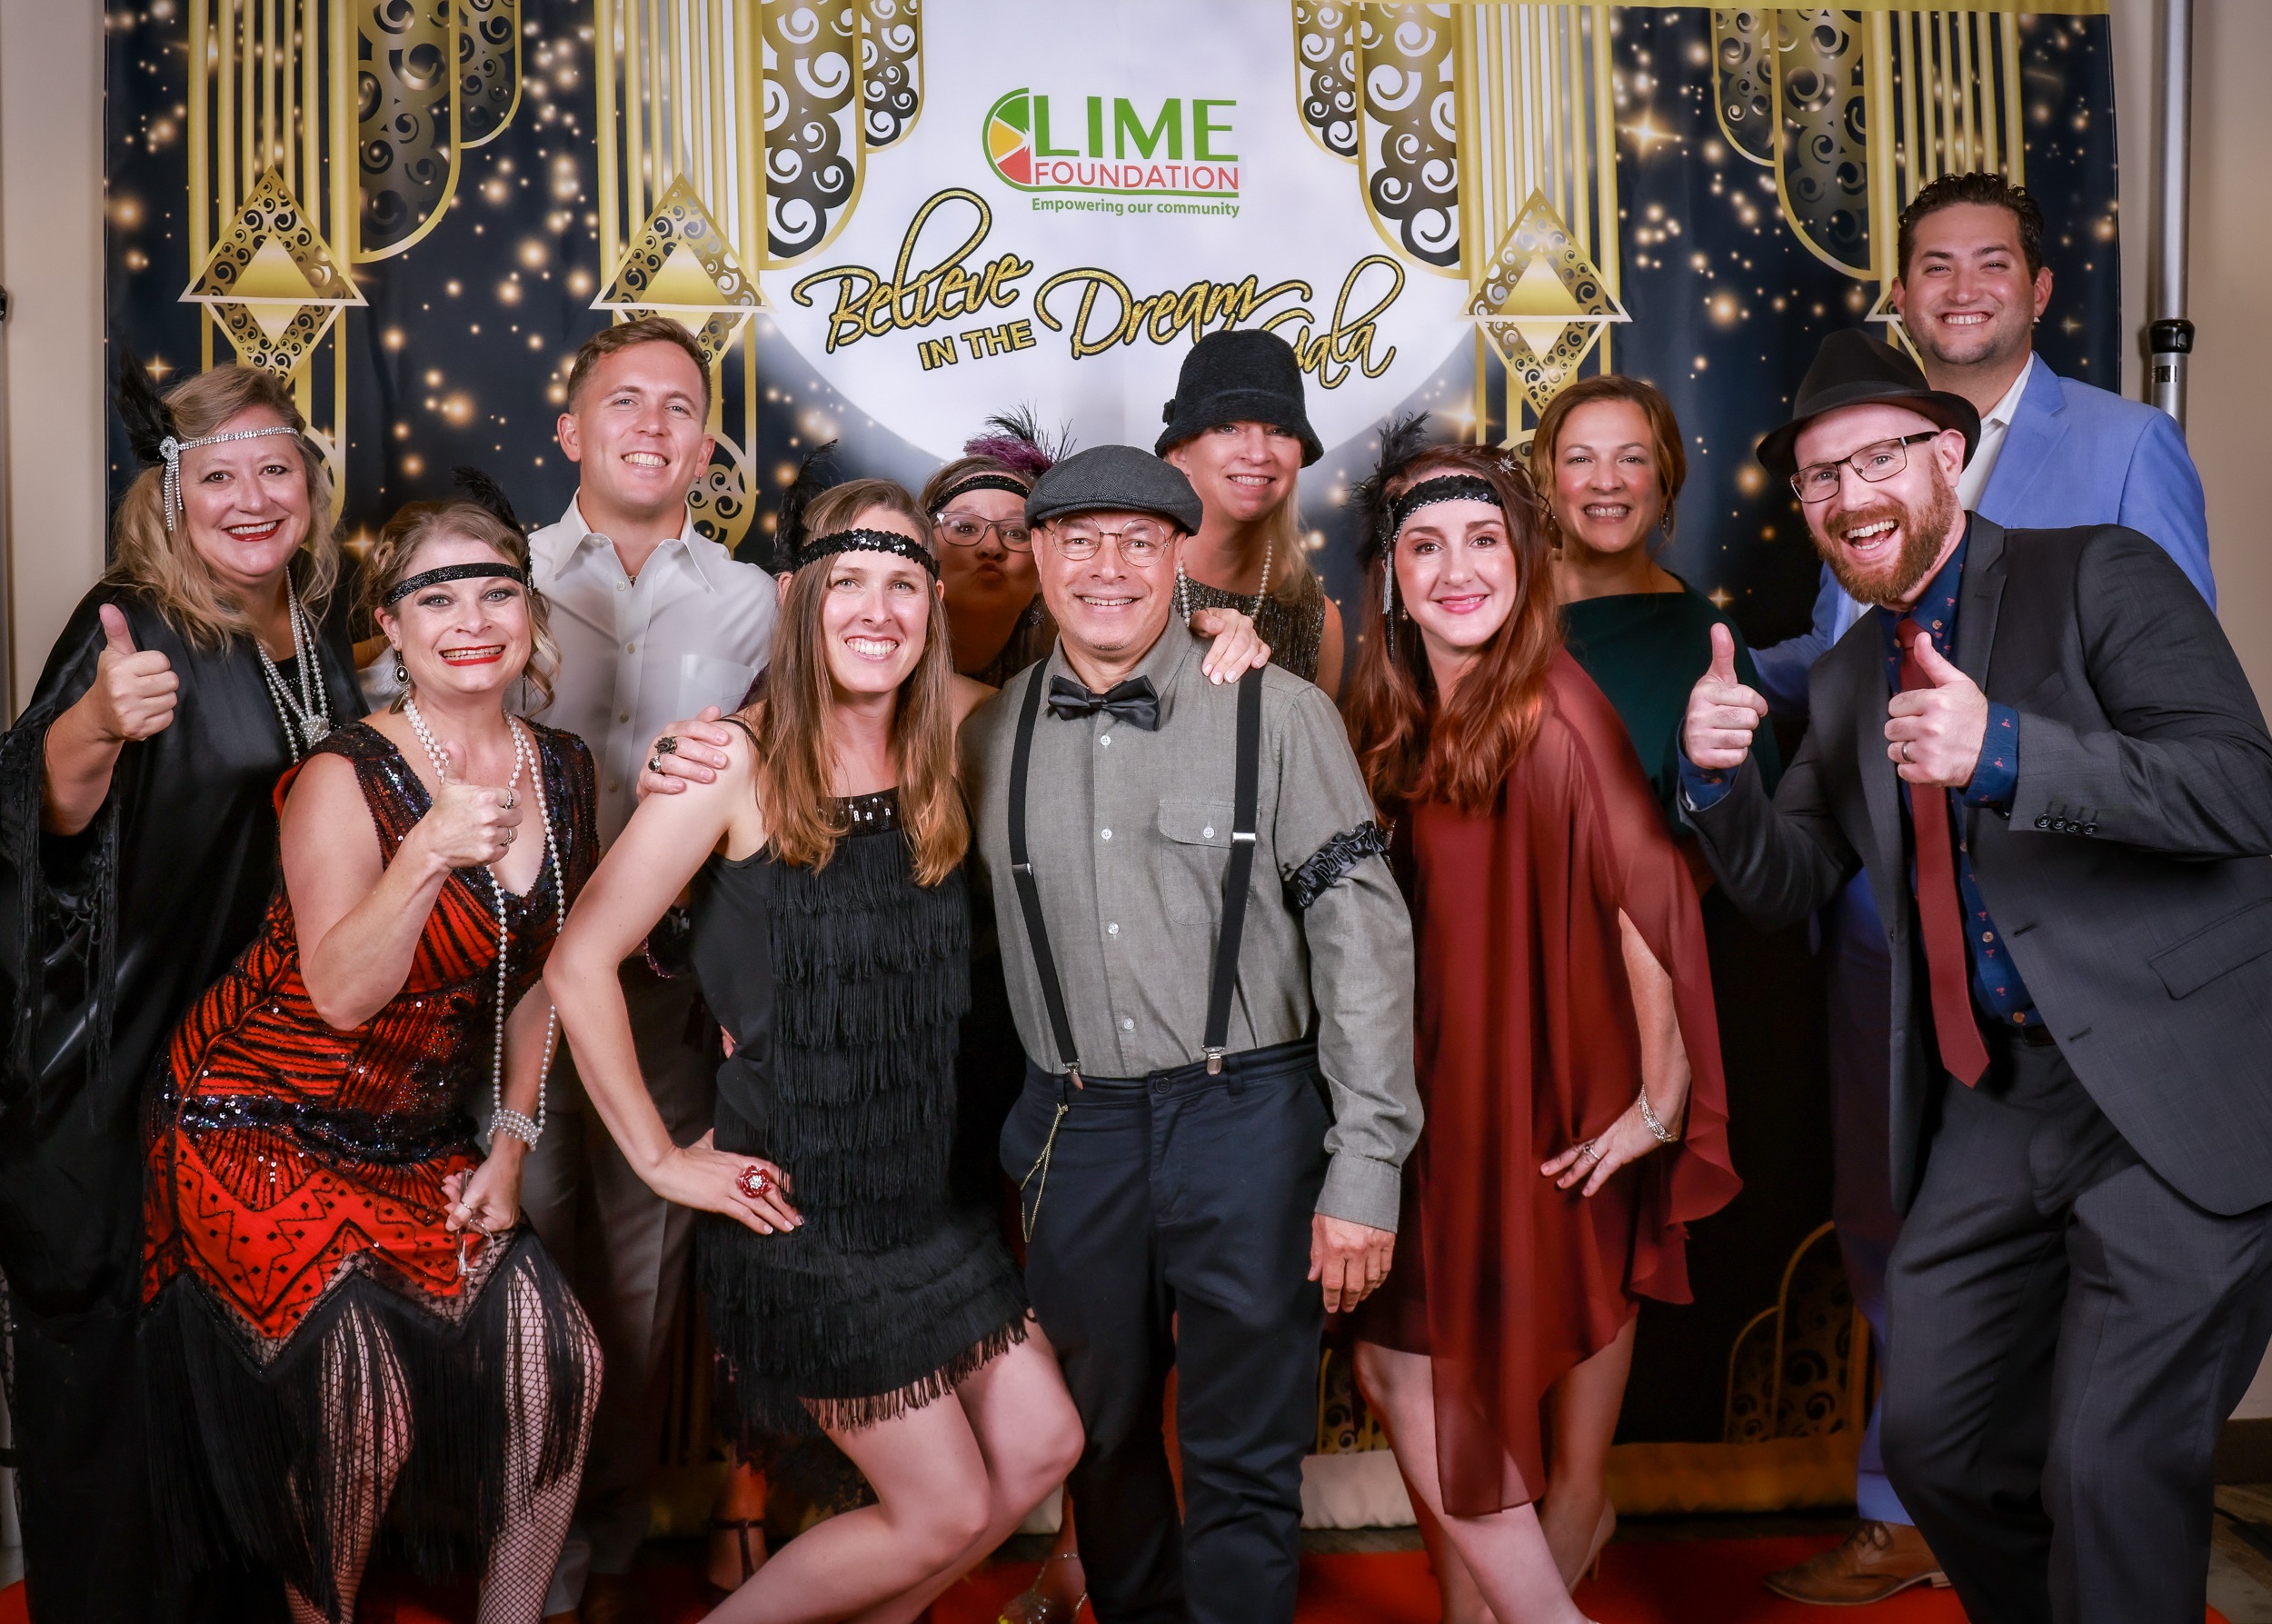 A group of people posing for a photo at a party hosted by the LIME Foundation in Santa Rosa.